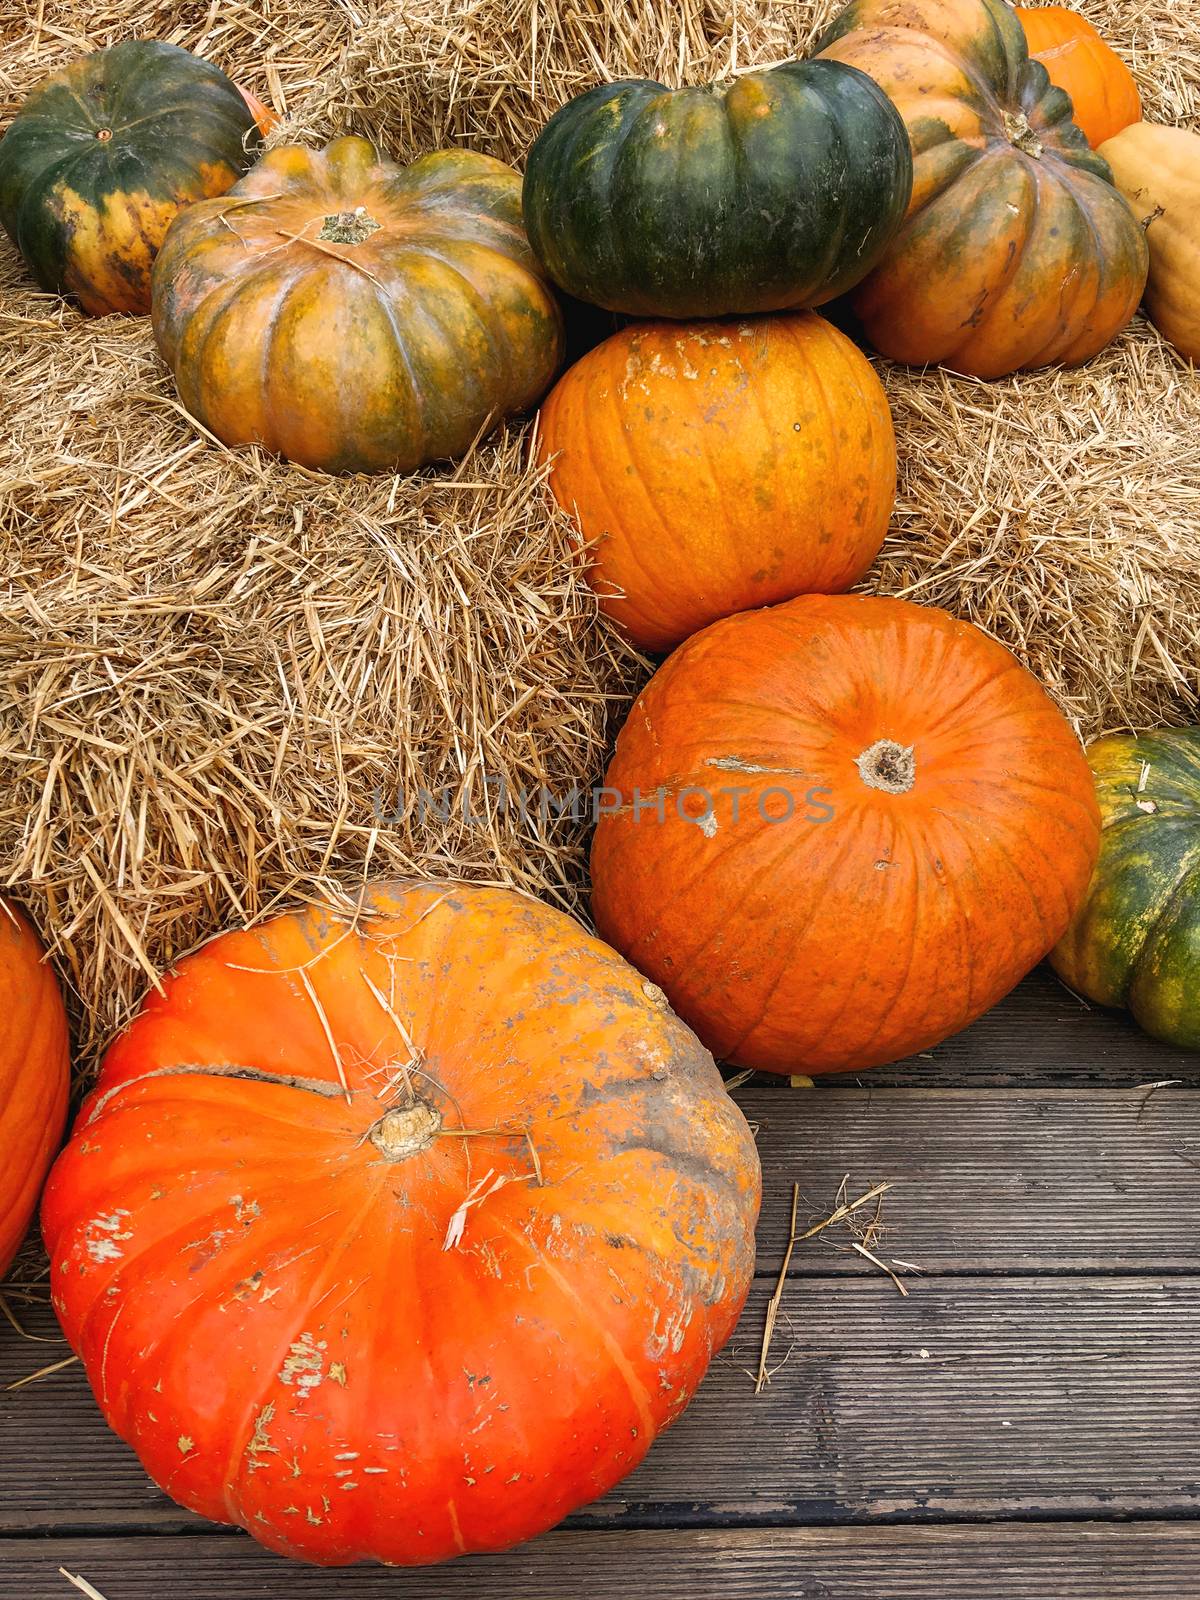 Bright orange and green pumpkins on straw. Autumn crop. Fall season background with colorful vegetables.